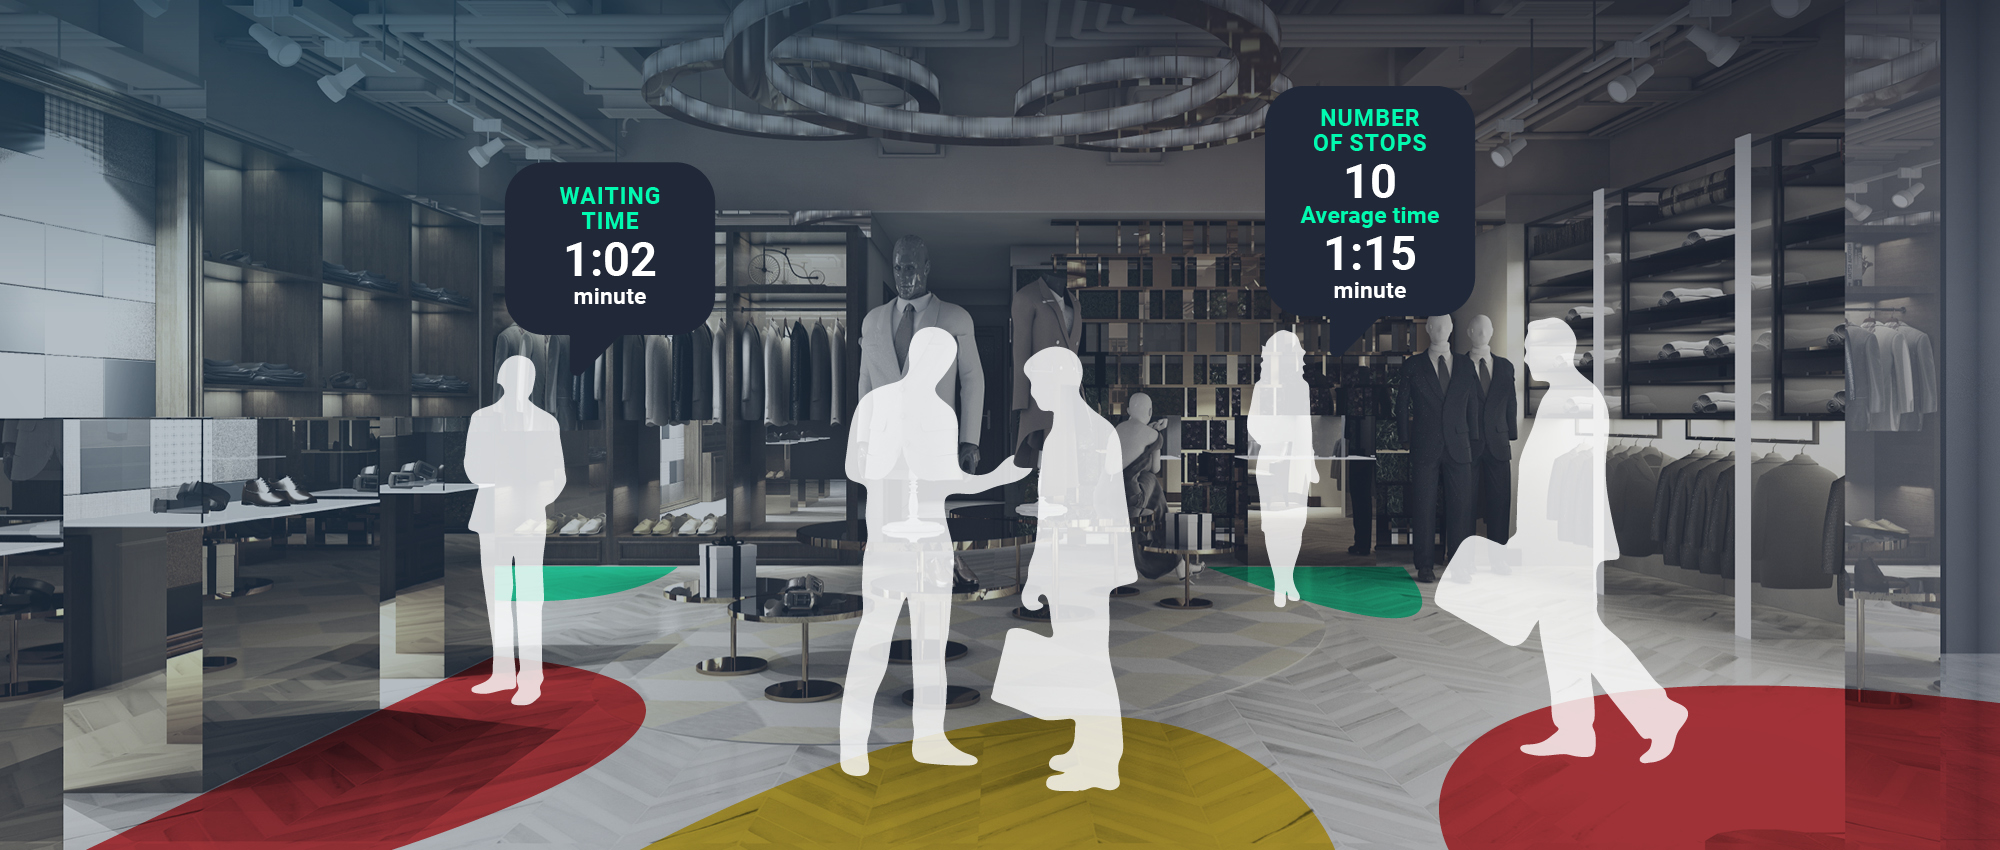 We see a store setting with people and in the info bubbles tells us the waiting time and the number of stops and average time consumers do in the store.